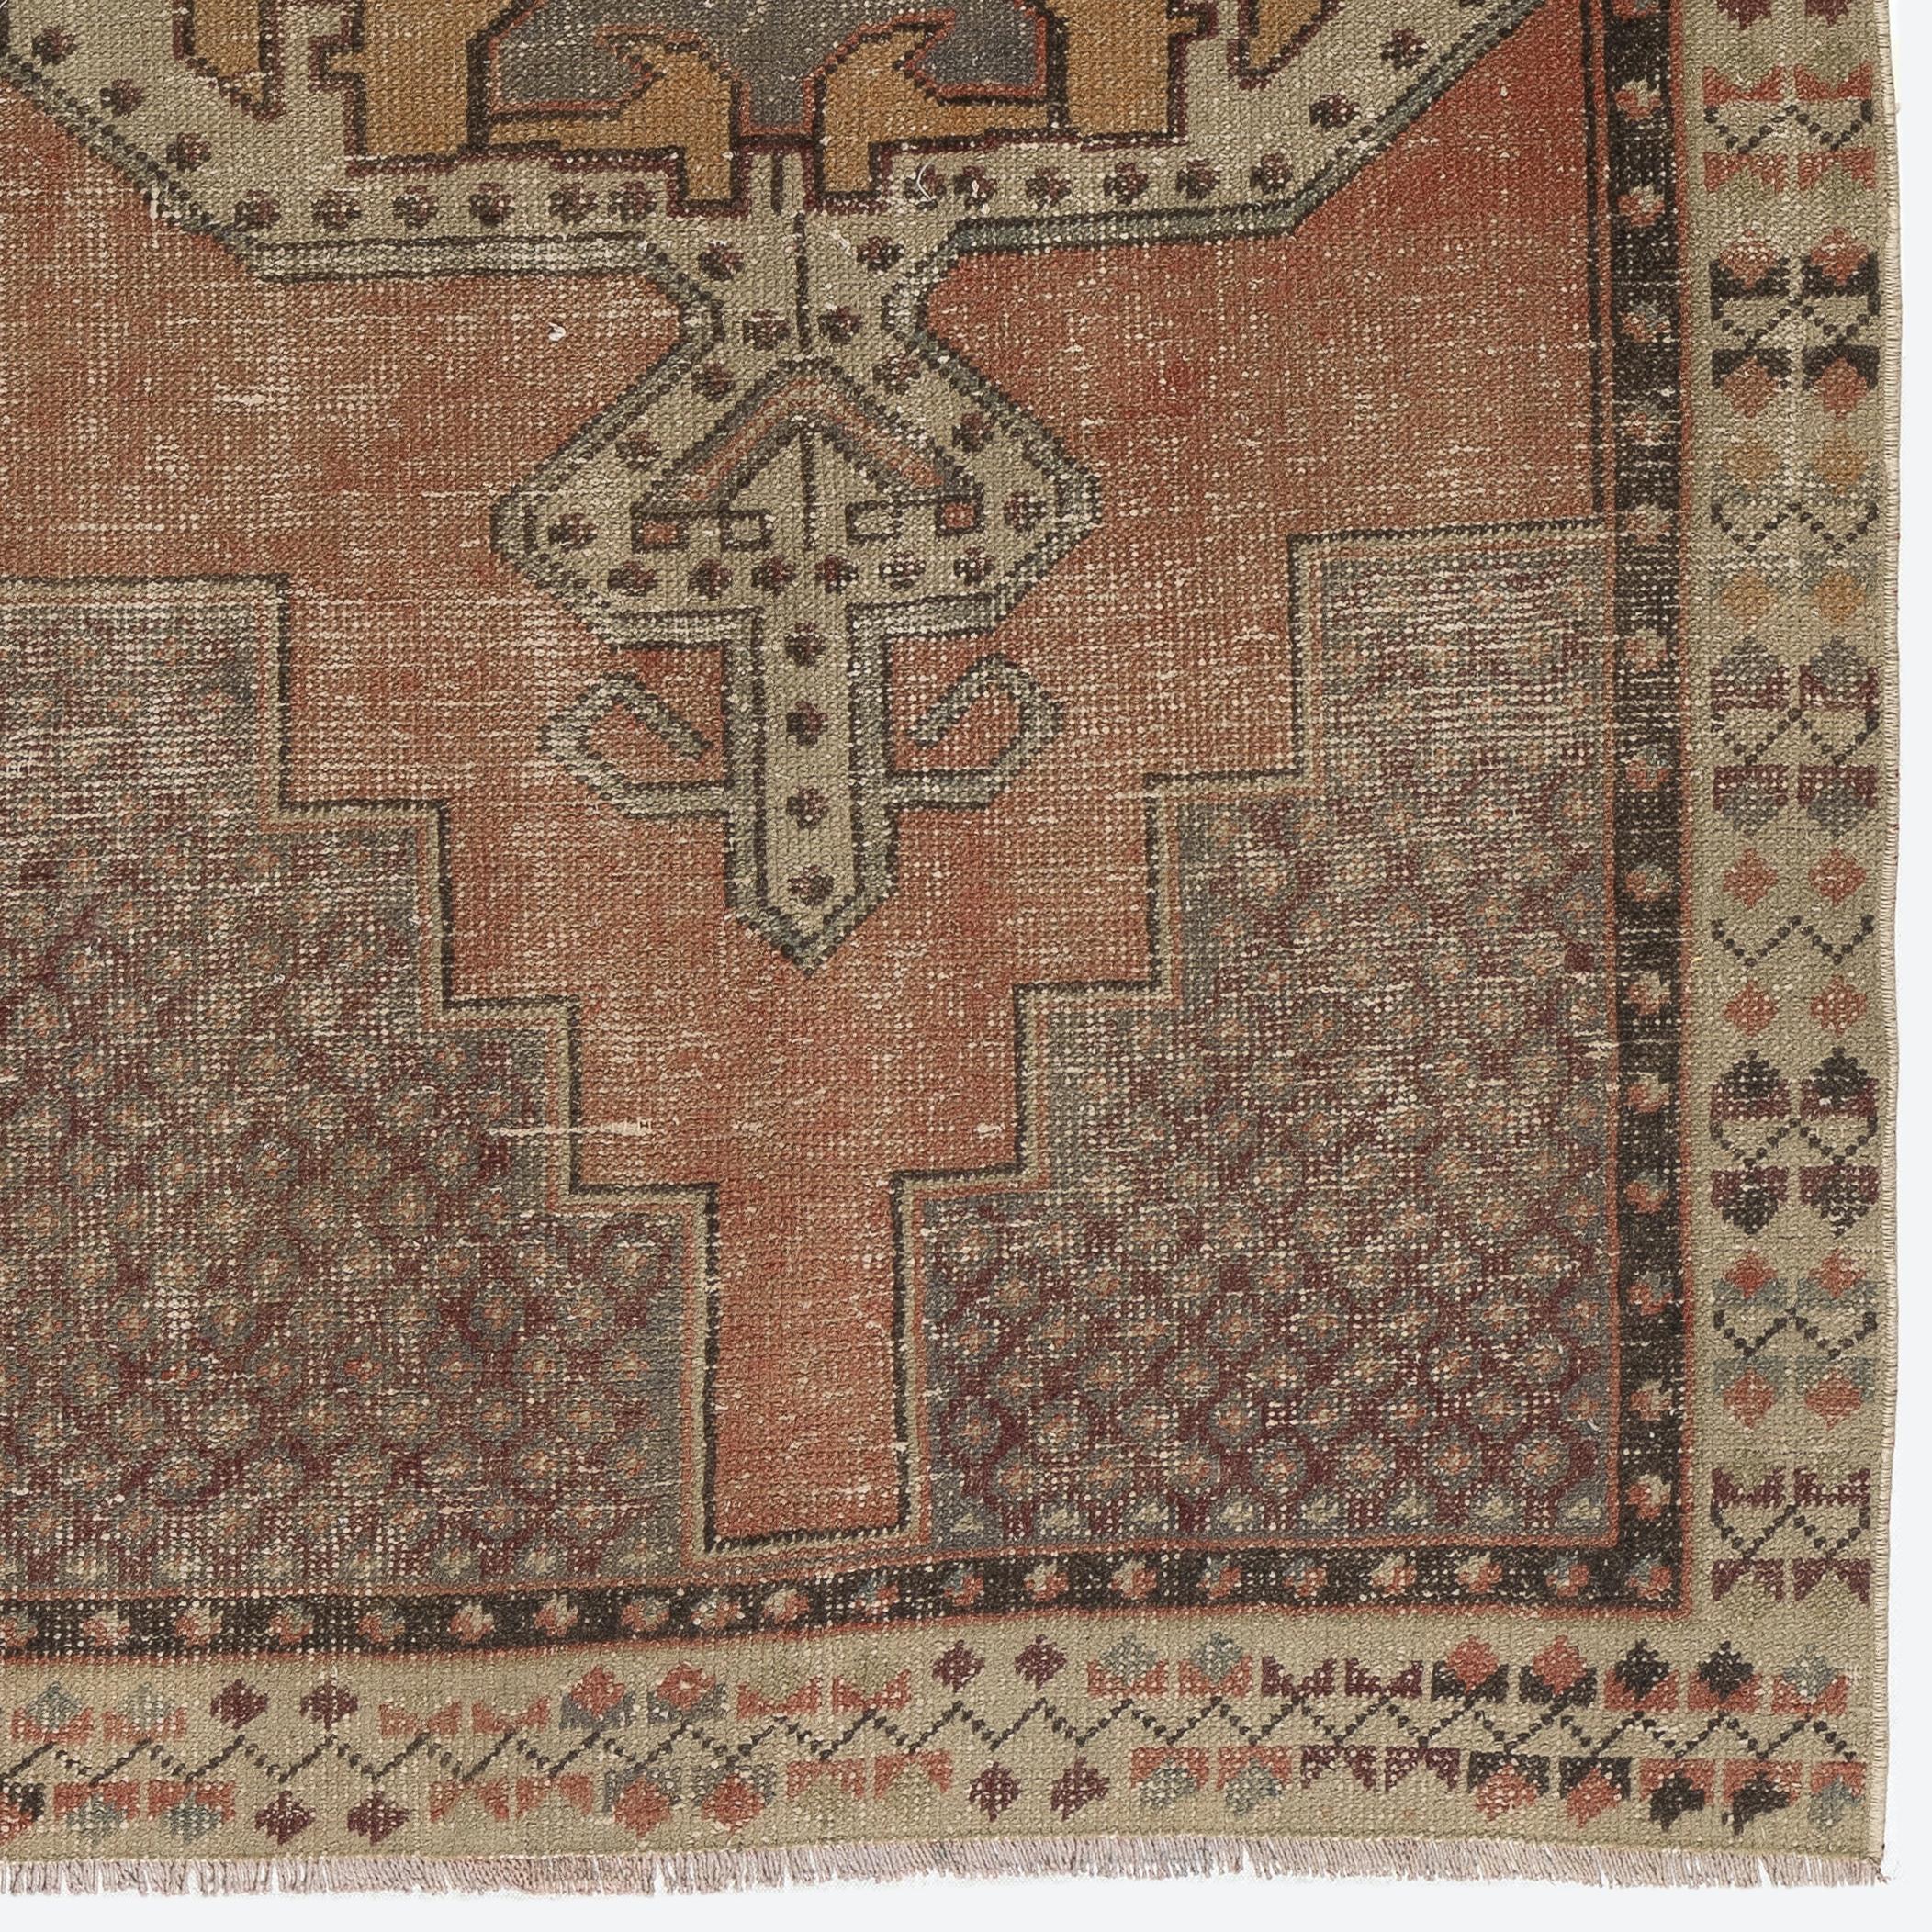 A finely hand-knotted vintage Turkish carpet from 1950s featuring a geometric medallion design. The rug has even low wool pile on cotton foundation. It is heavy and lays flat on the floor, in very good condition with no issues. It has been washed